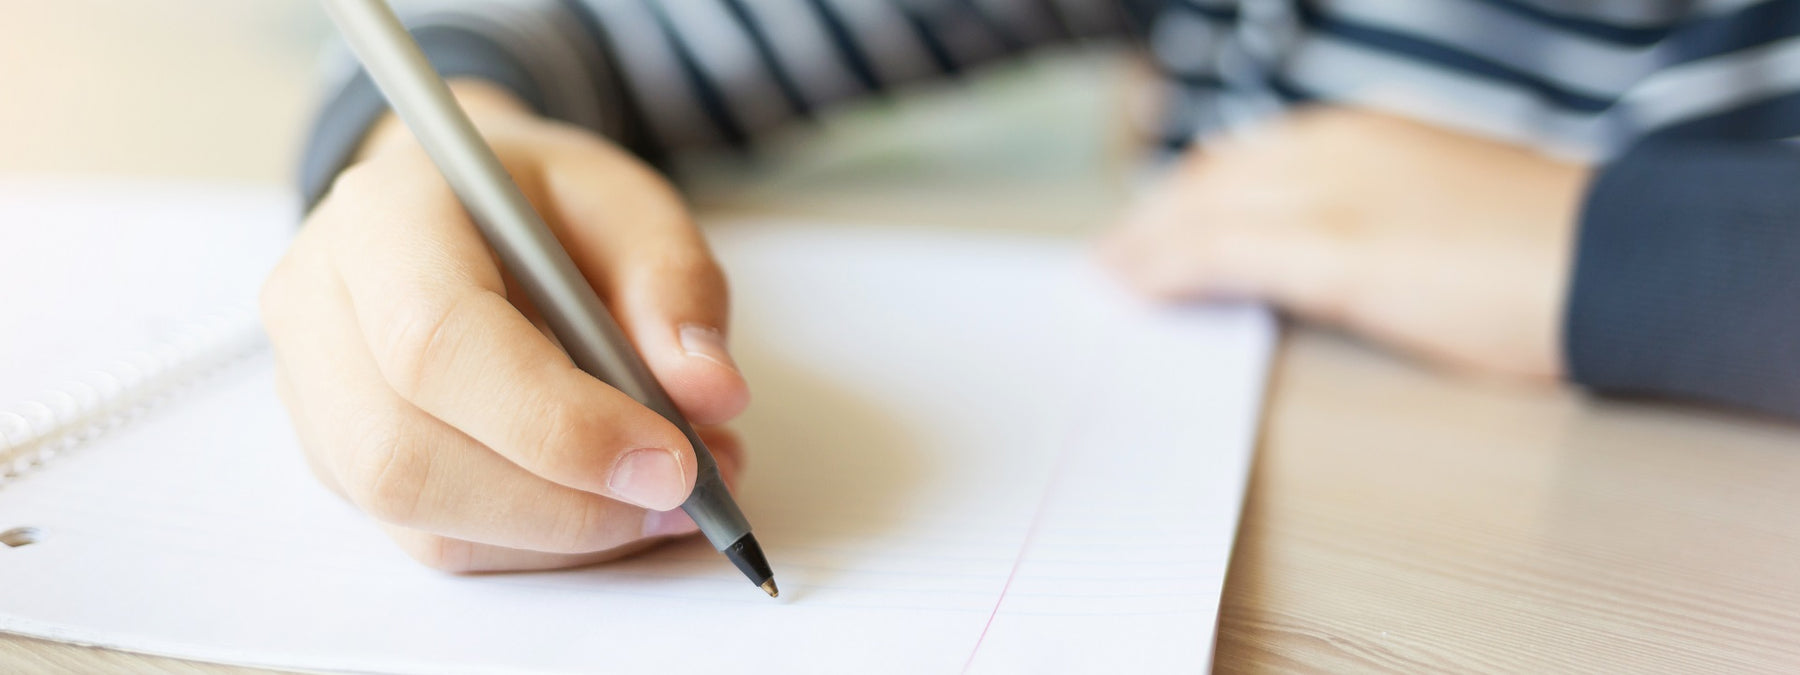 How can you improve handwriting in children?